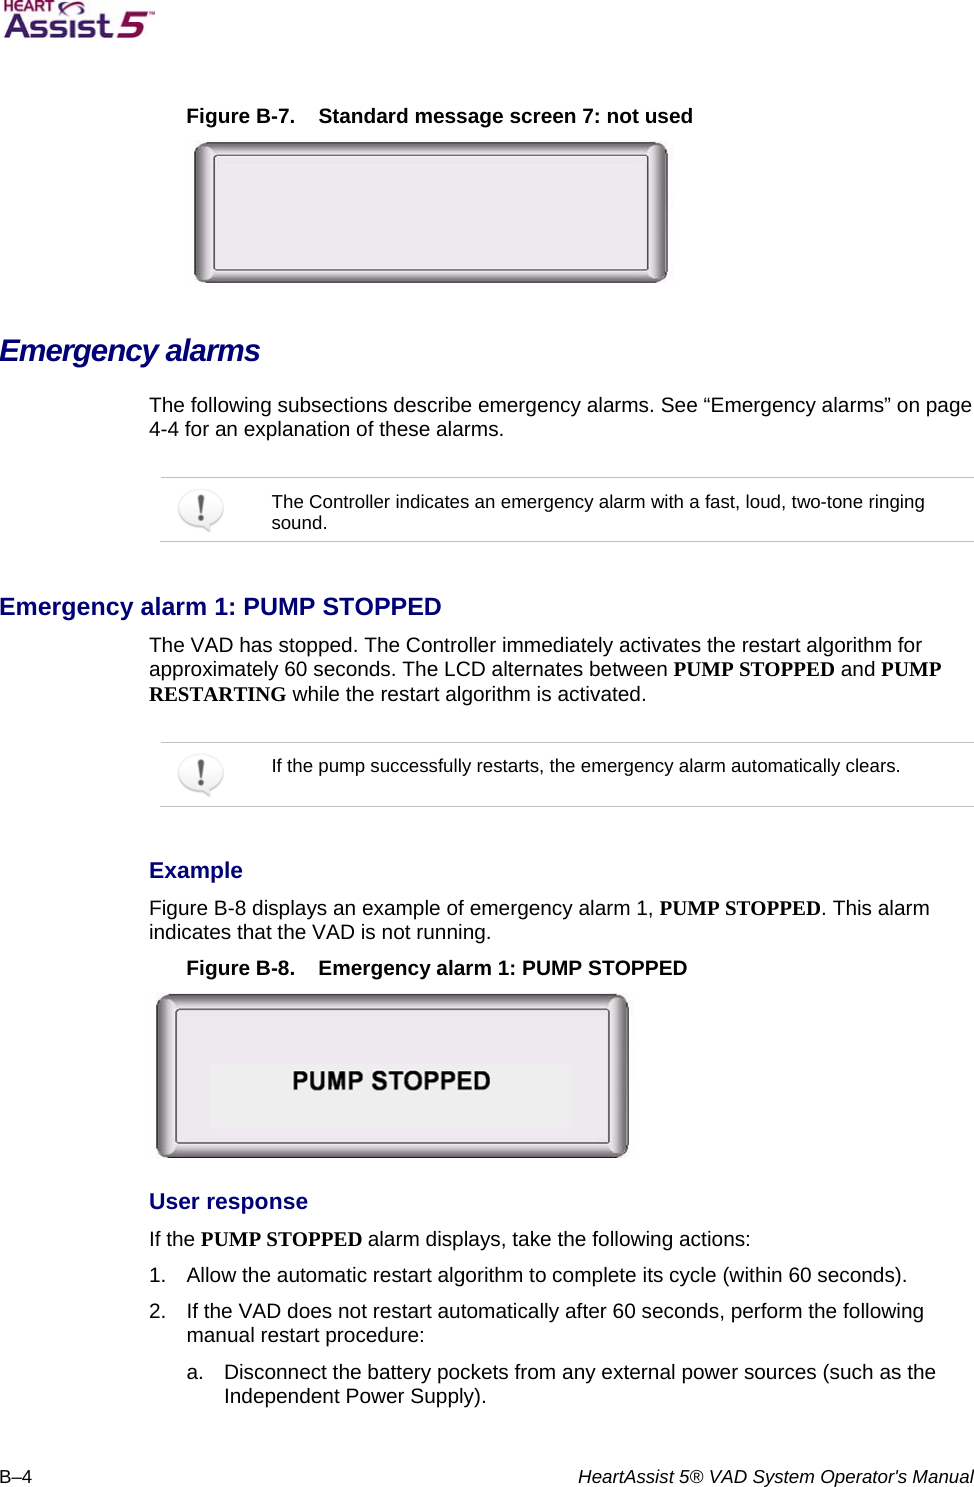   B–4  HeartAssist 5® VAD System Operator&apos;s Manual  Figure B-7.  Standard message screen 7: not used  Emergency alarms  The following subsections describe emergency alarms. See “Emergency alarms” on page 4-4 for an explanation of these alarms.      The Controller indicates an emergency alarm with a fast, loud, two-tone ringing sound.  Emergency alarm 1: PUMP STOPPED  The VAD has stopped. The Controller immediately activates the restart algorithm for approximately 60 seconds. The LCD alternates between PUMP STOPPED and PUMP RESTARTING while the restart algorithm is activated.    If the pump successfully restarts, the emergency alarm automatically clears.  Example  Figure B-8 displays an example of emergency alarm 1, PUMP STOPPED. This alarm indicates that the VAD is not running.  Figure B-8.  Emergency alarm 1: PUMP STOPPED  User response  If the PUMP STOPPED alarm displays, take the following actions:  1.  Allow the automatic restart algorithm to complete its cycle (within 60 seconds).  2.  If the VAD does not restart automatically after 60 seconds, perform the following manual restart procedure:  a.  Disconnect the battery pockets from any external power sources (such as the Independent Power Supply).    